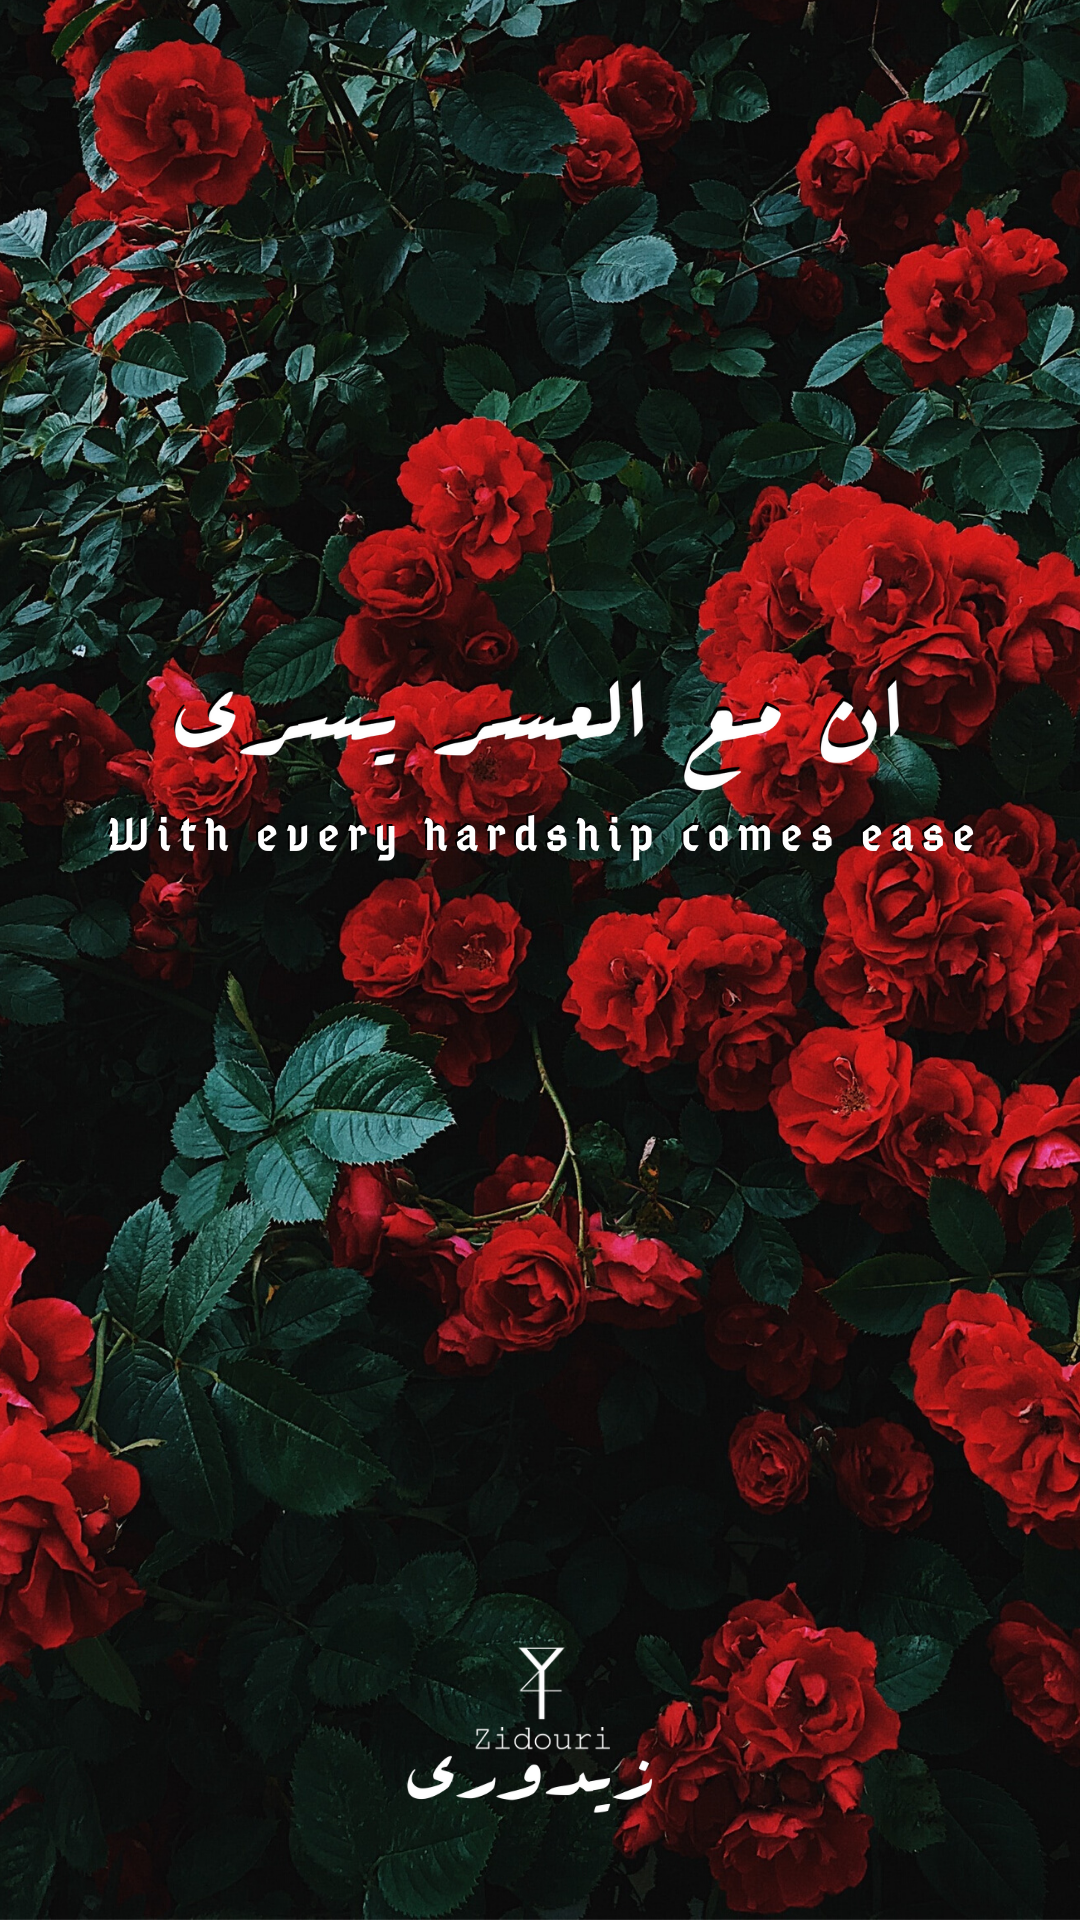 With every hardship there is ease